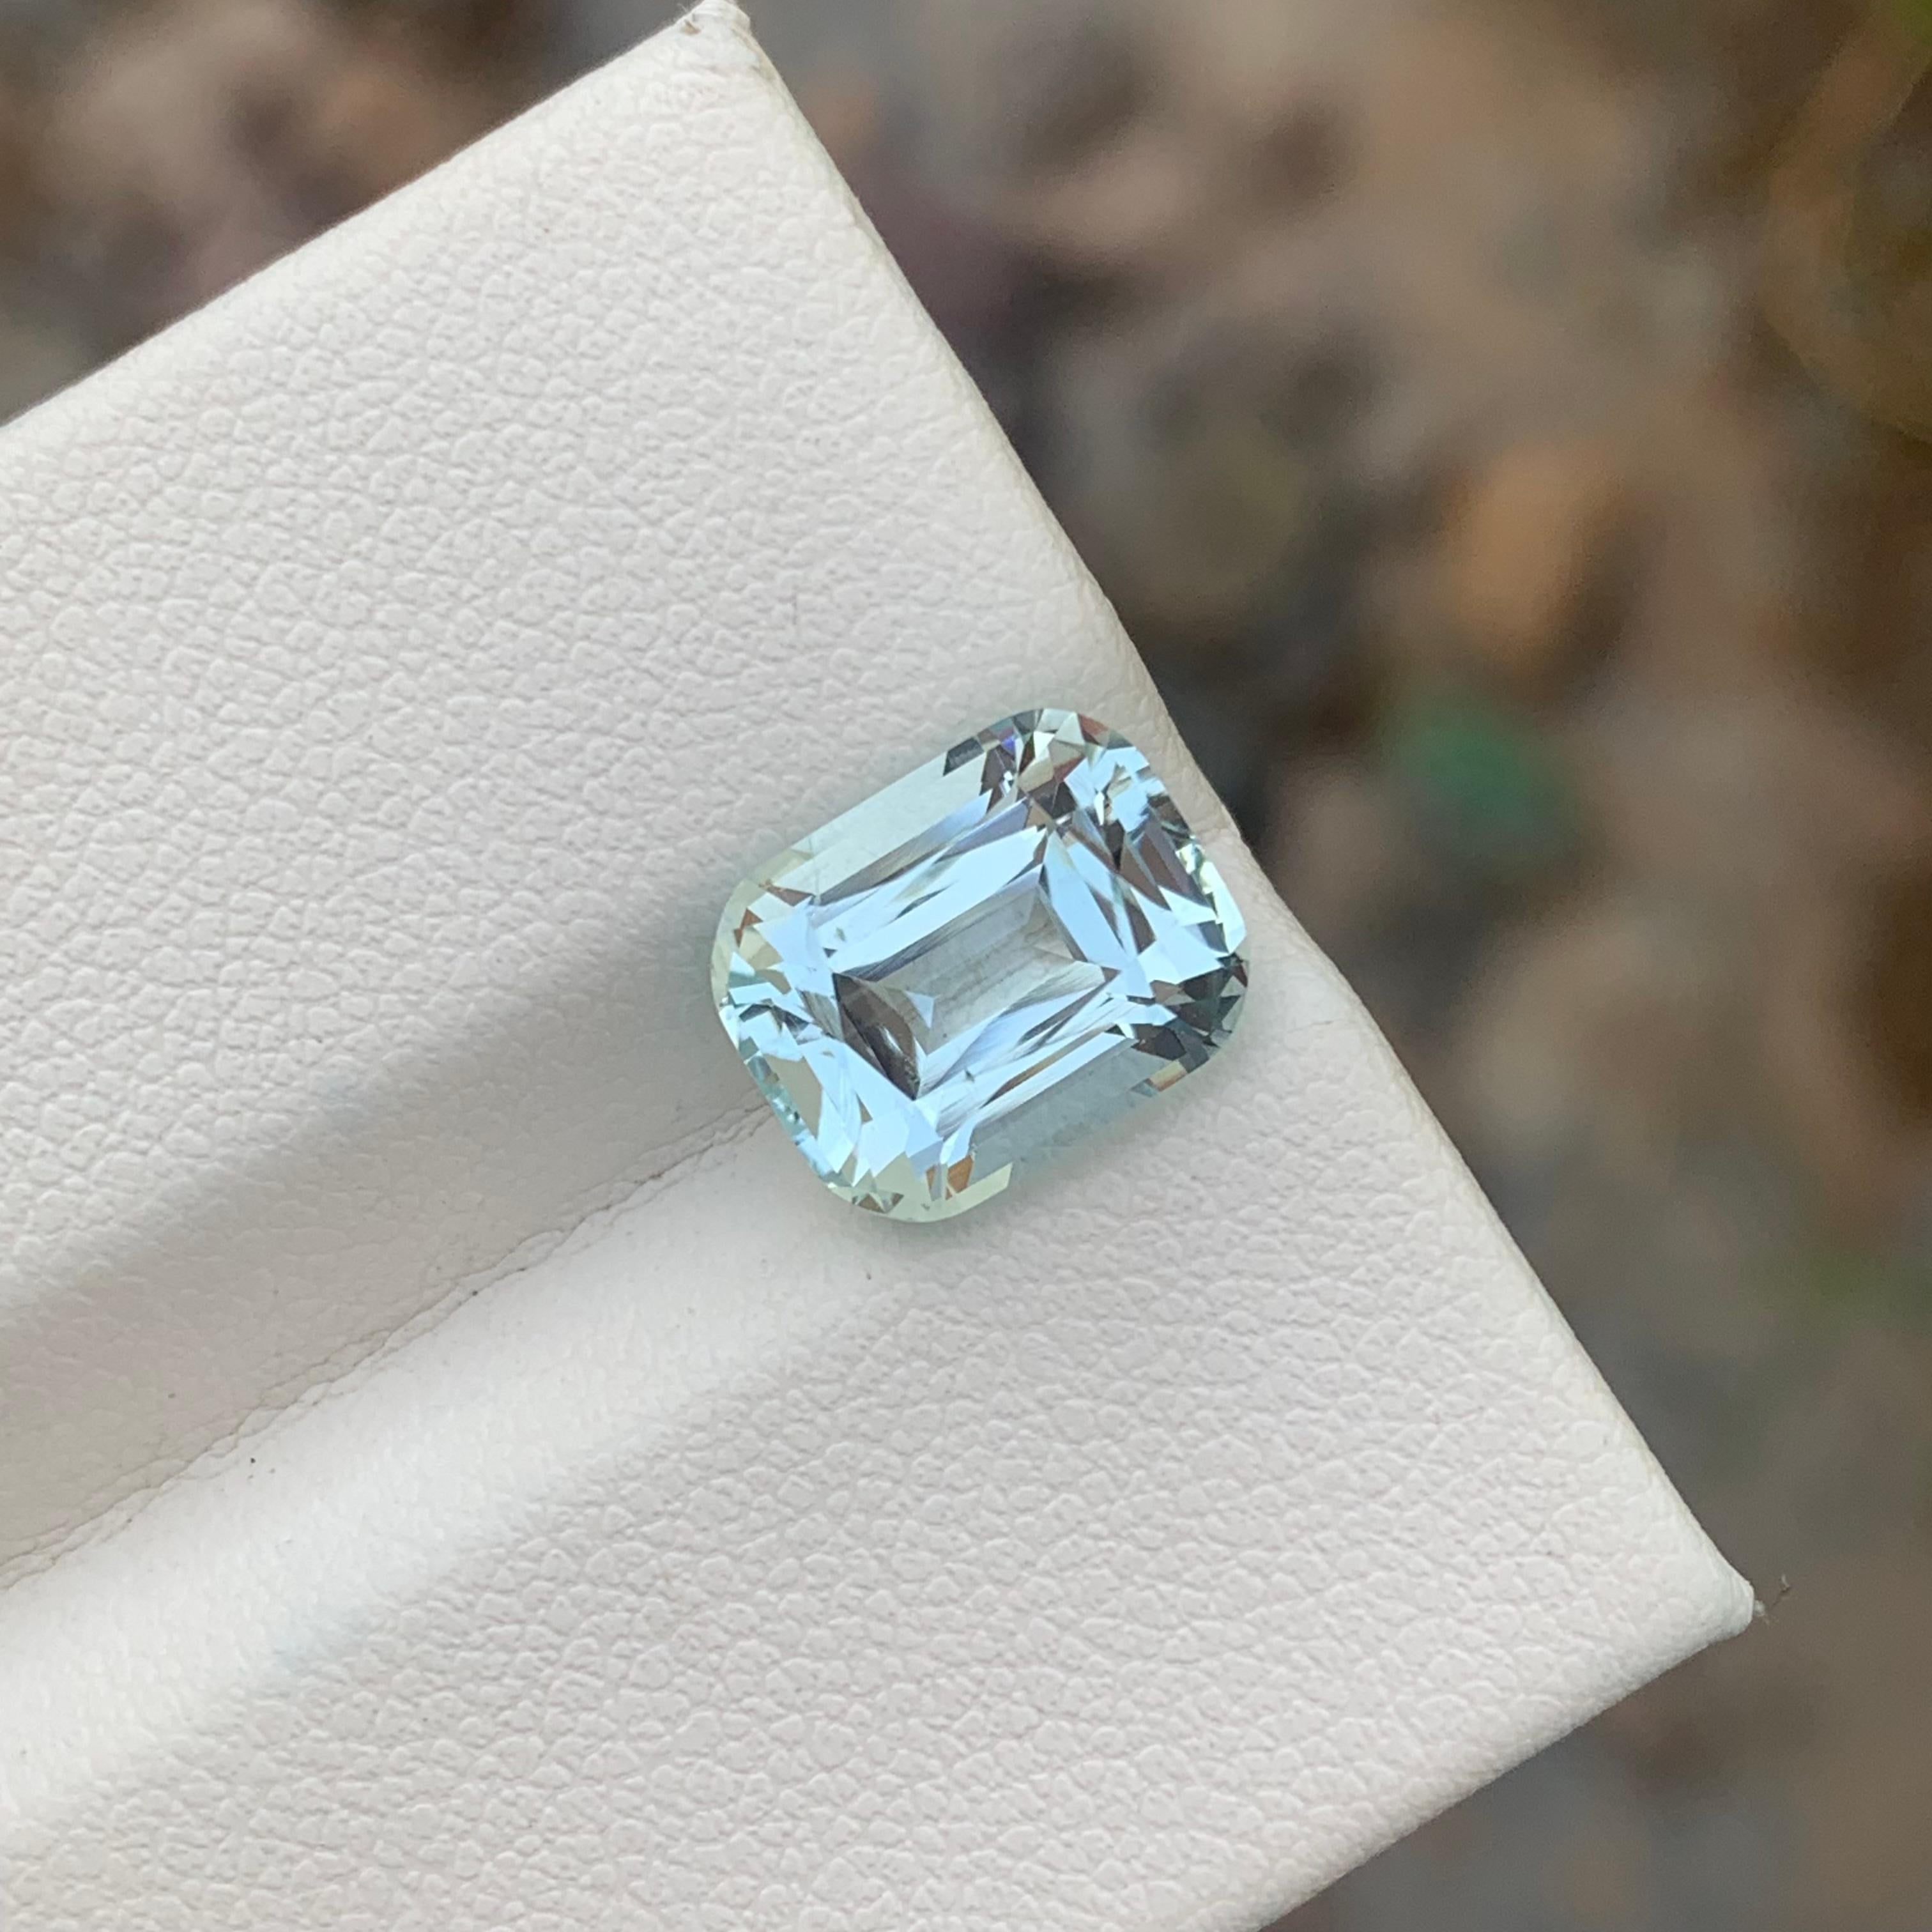 Faceted Aquamarine 
Weight: 4.15 Carats 
Dimension: 10.7x8.6x6.7 Mm
Origin: Shigar Valley Pakistan 
Color: Light Blue 
Shape: cushion
Treatment: Non
Certificate: On Customer demand
.
Aquamarine is a captivating gemstone known for its stunning